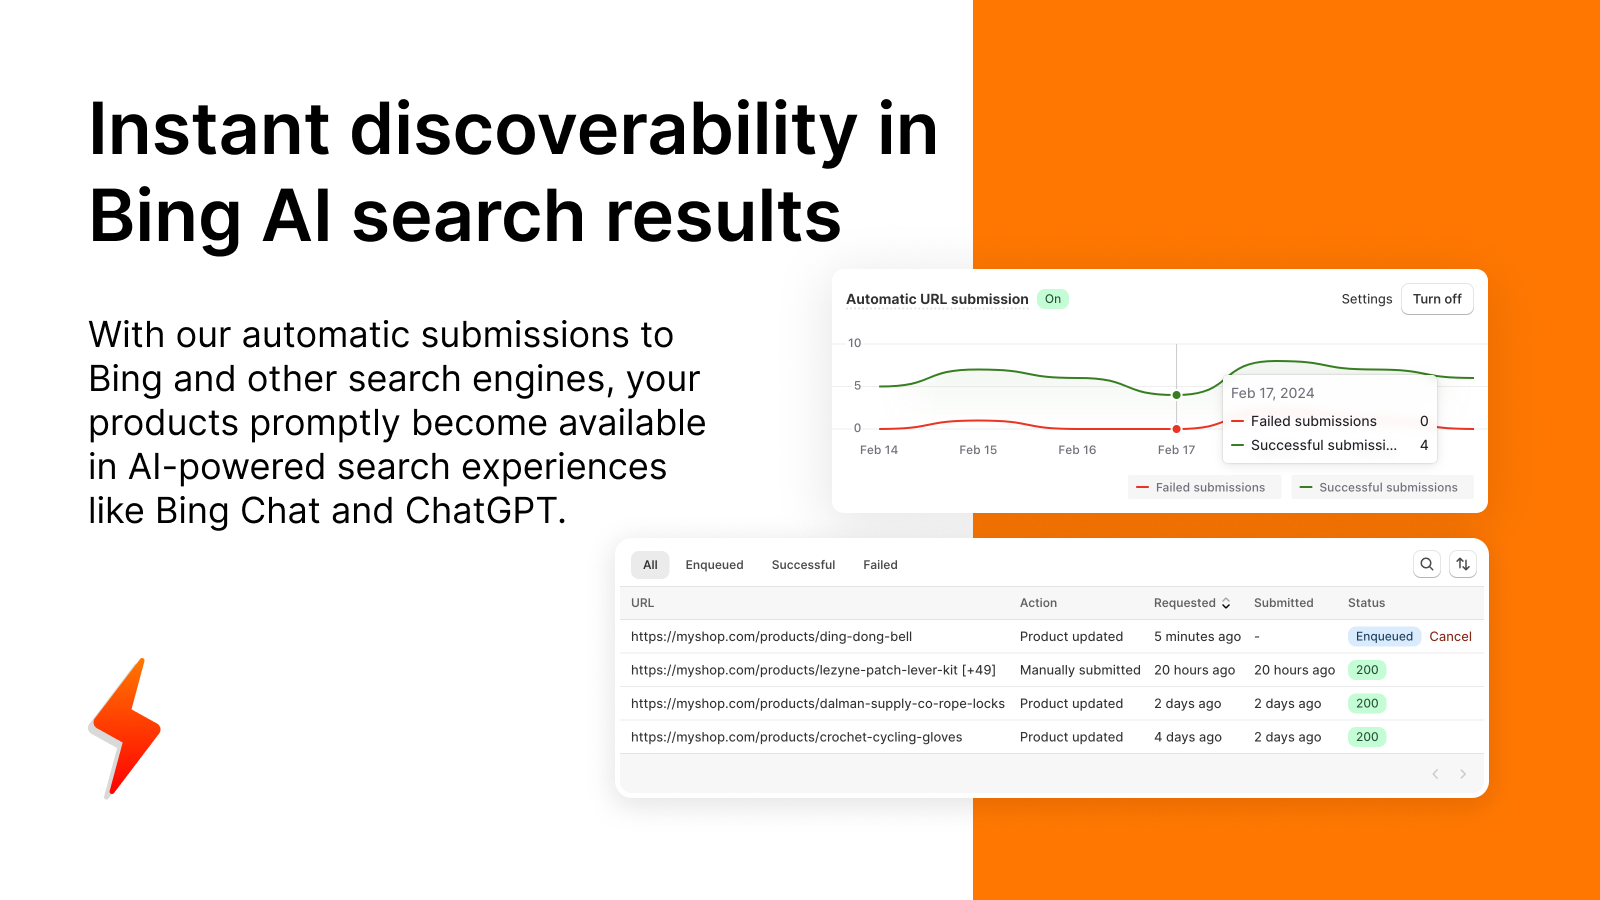 Instant discoverability in Bing AI search results - InstaIndex